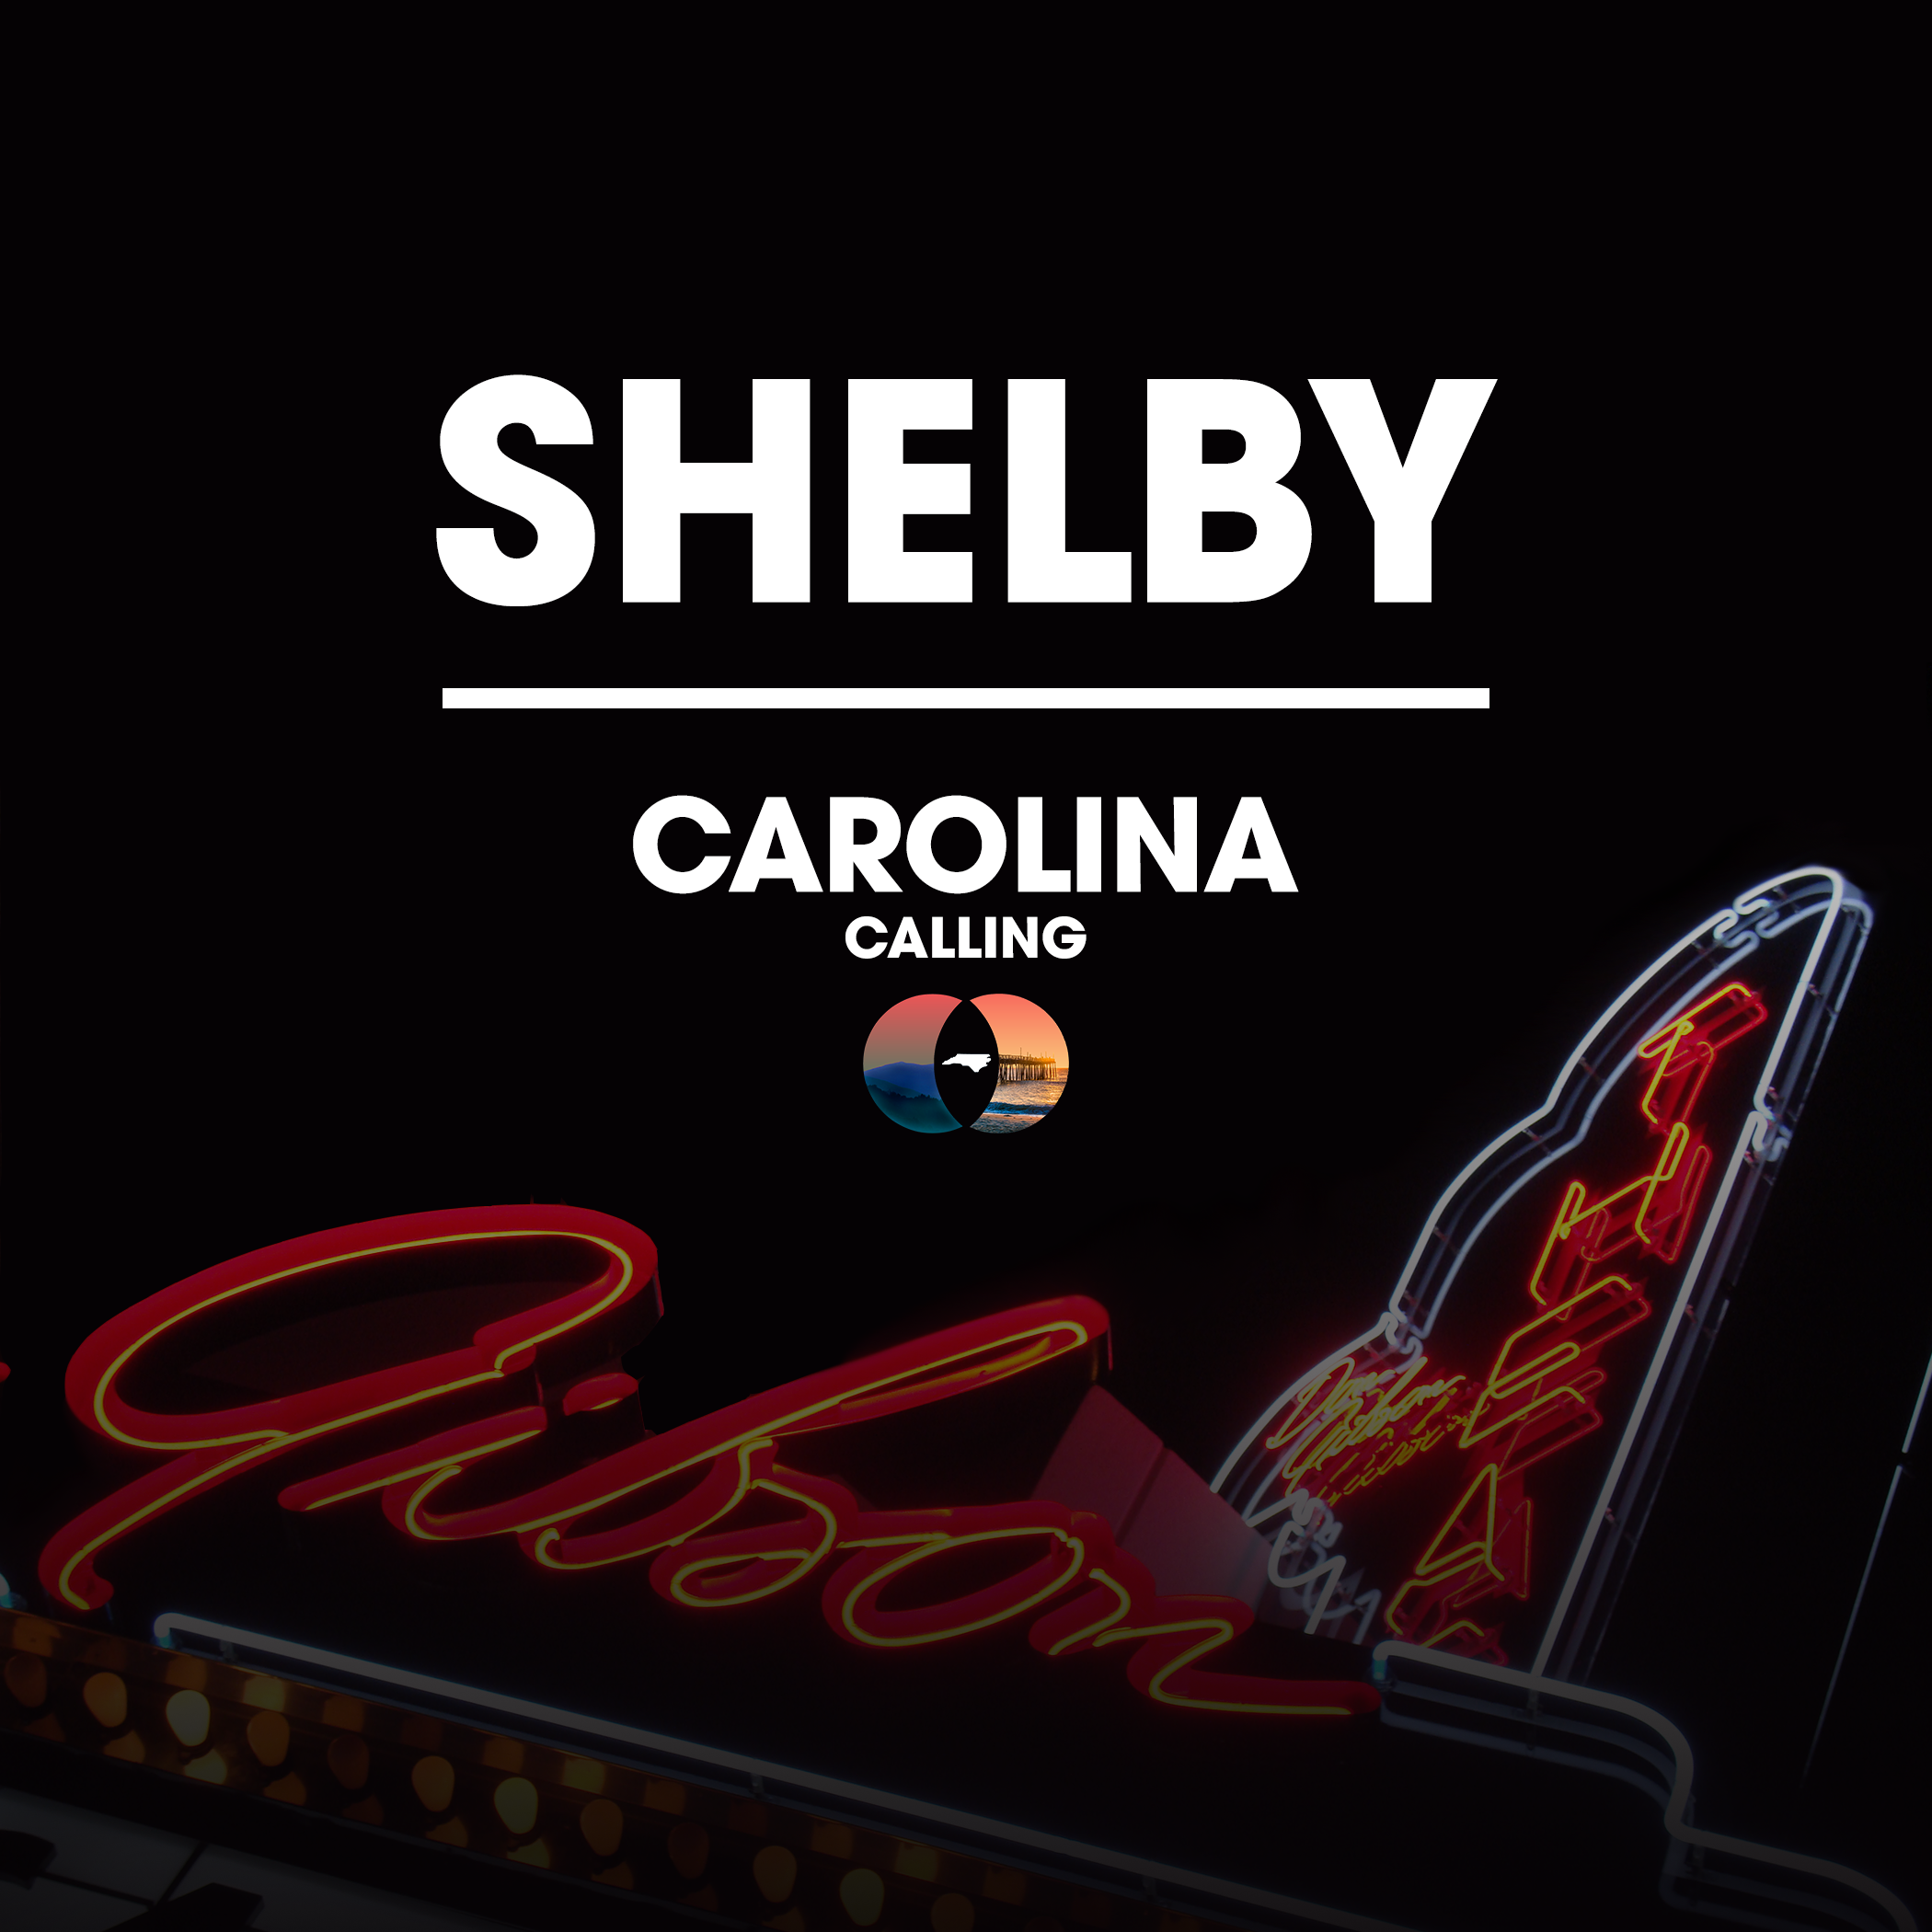 Carolina Calling, Shelby: Local Legends Breathe New Life Into Small Town